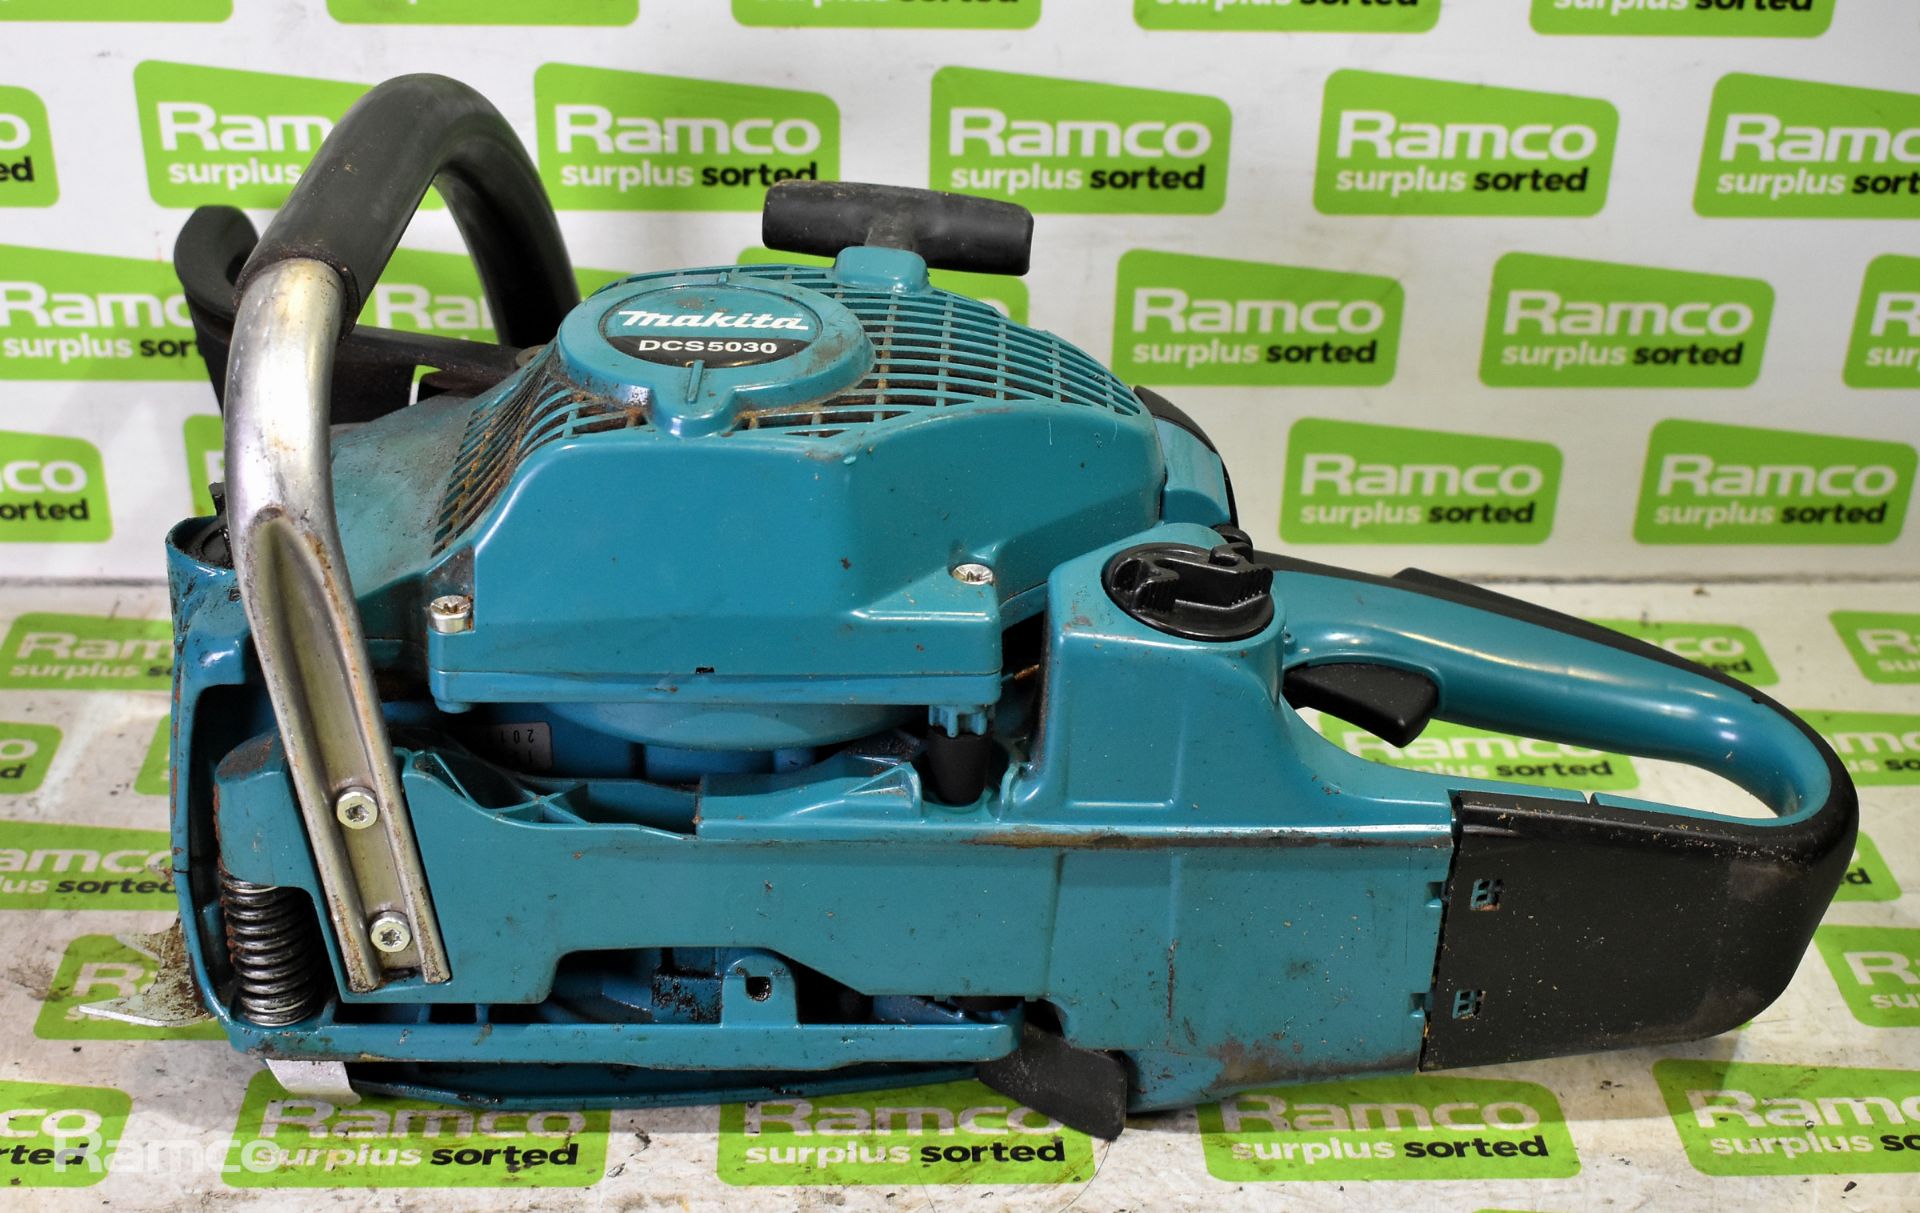 4x Makita DCS5030 50cc petrol chainsaws - BODIES ONLY - AS SPARES OR REPAIRS - Image 16 of 21